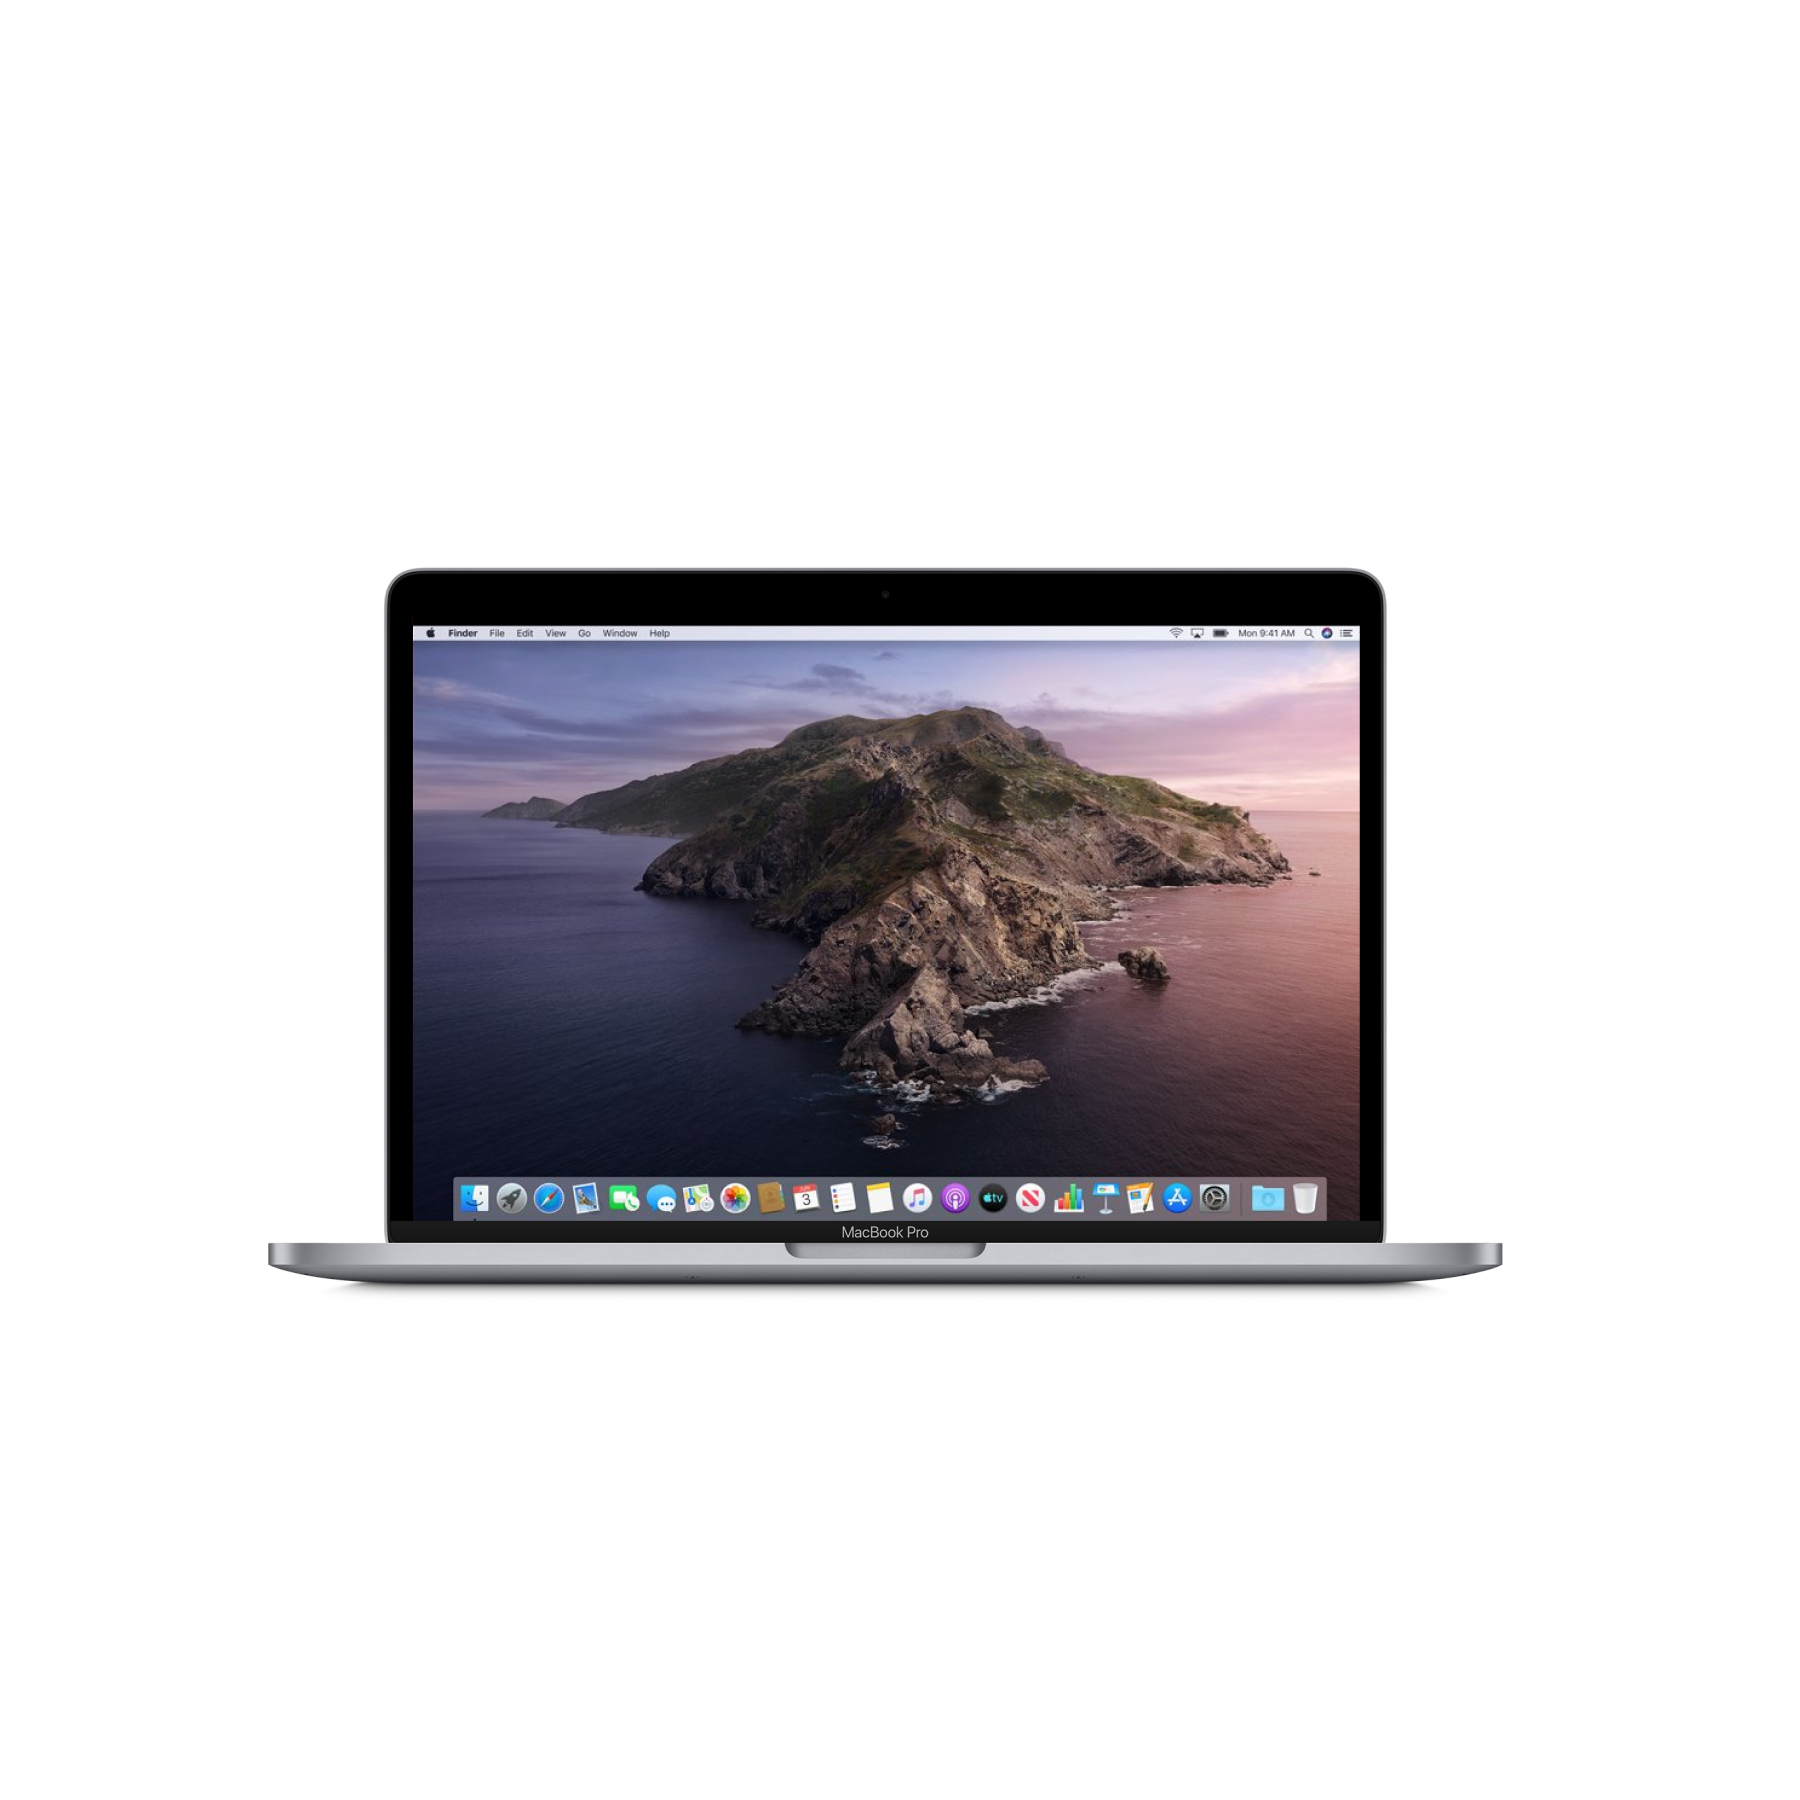 MacBook Pro (13-inch, 2019, Four Thunderbolt 3 ports) 2.4GHz, Intel Core i5 256GB - Space Grey (Good)